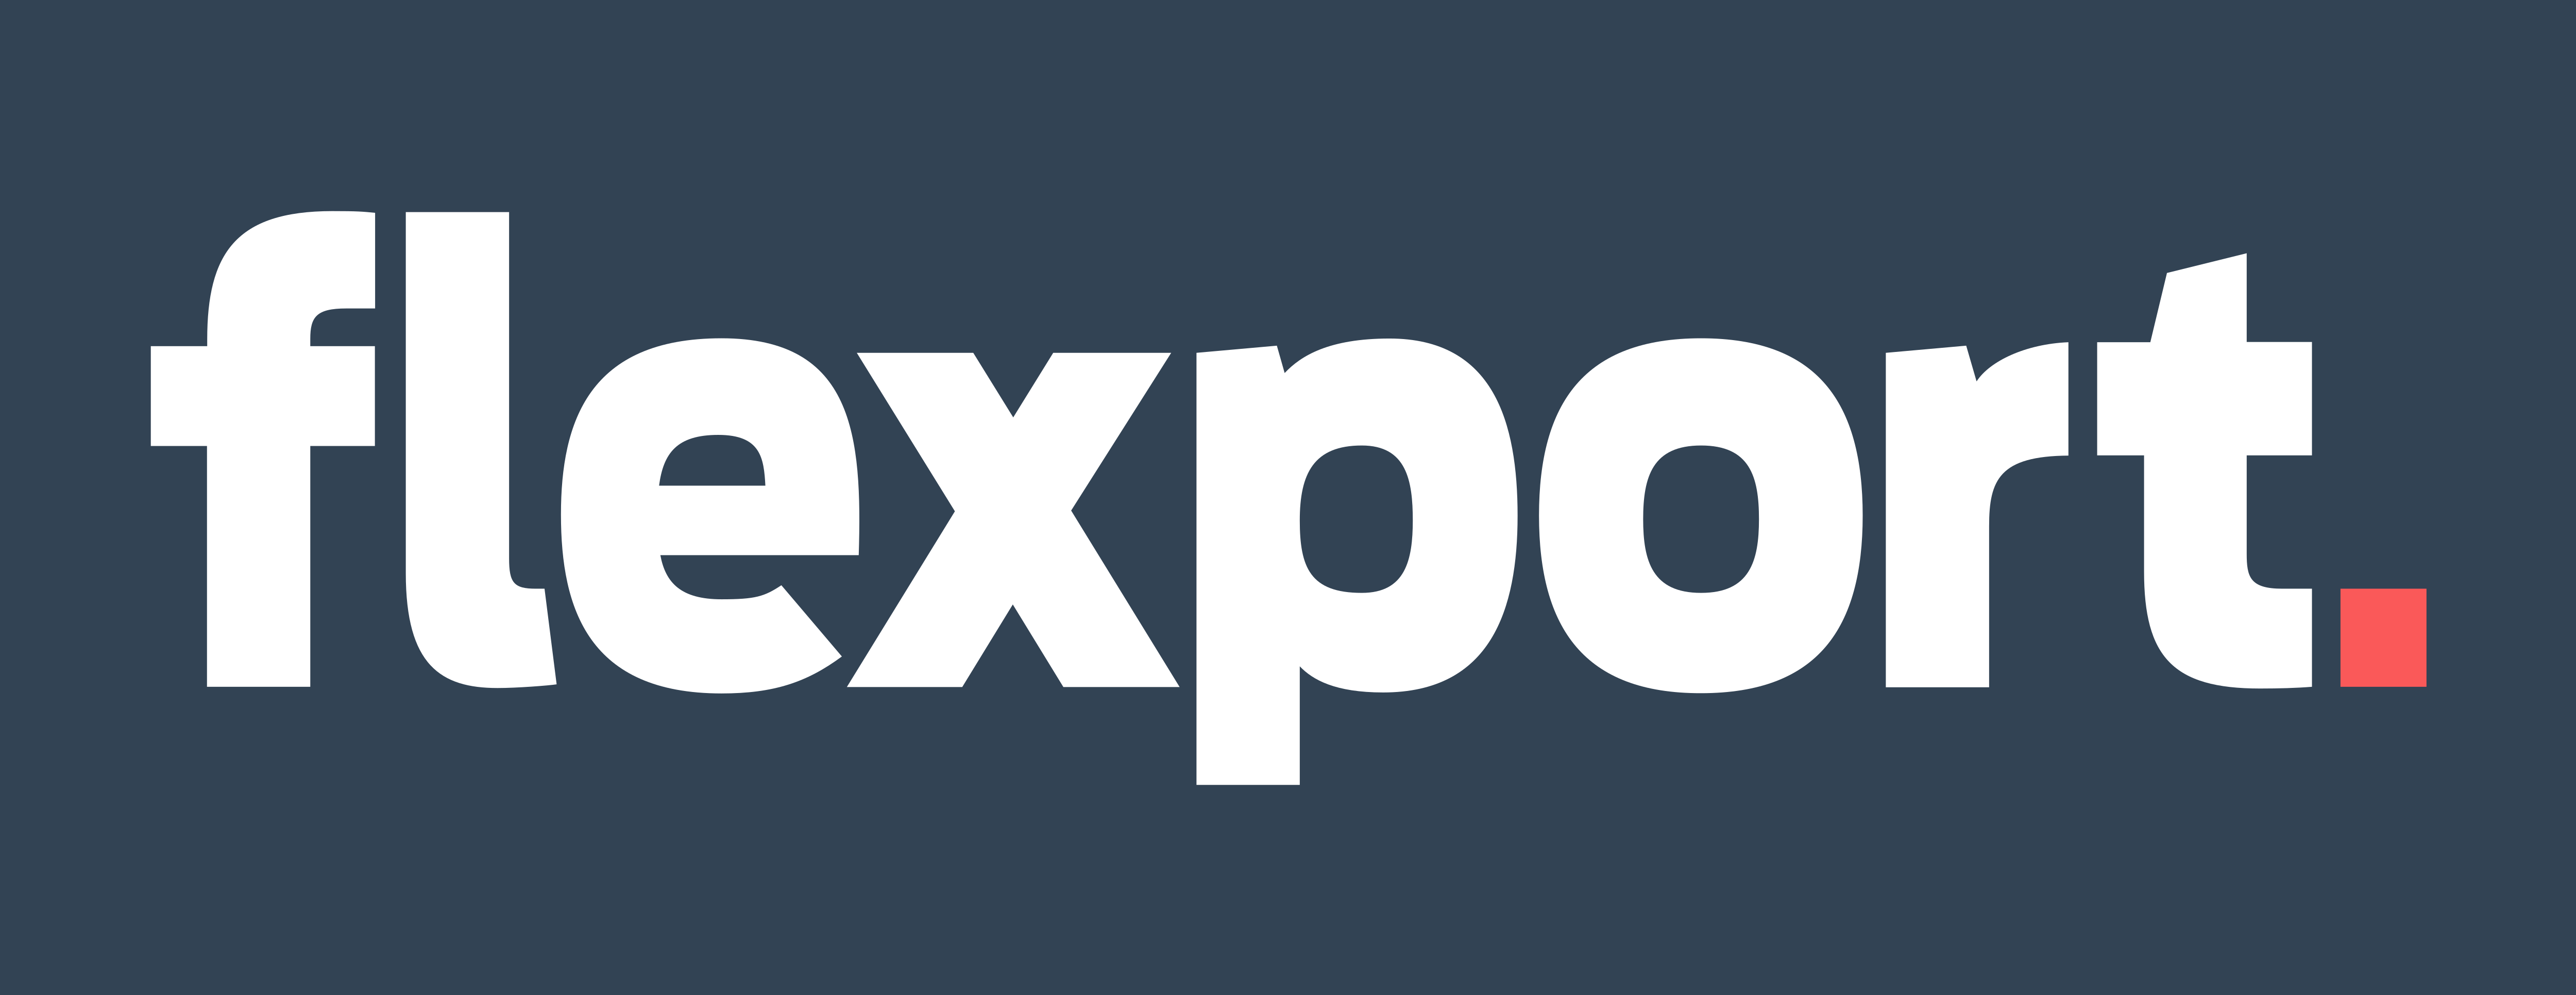 Dave Clark to Join Flexport as Chief Executive Officer - Transport Intelligence